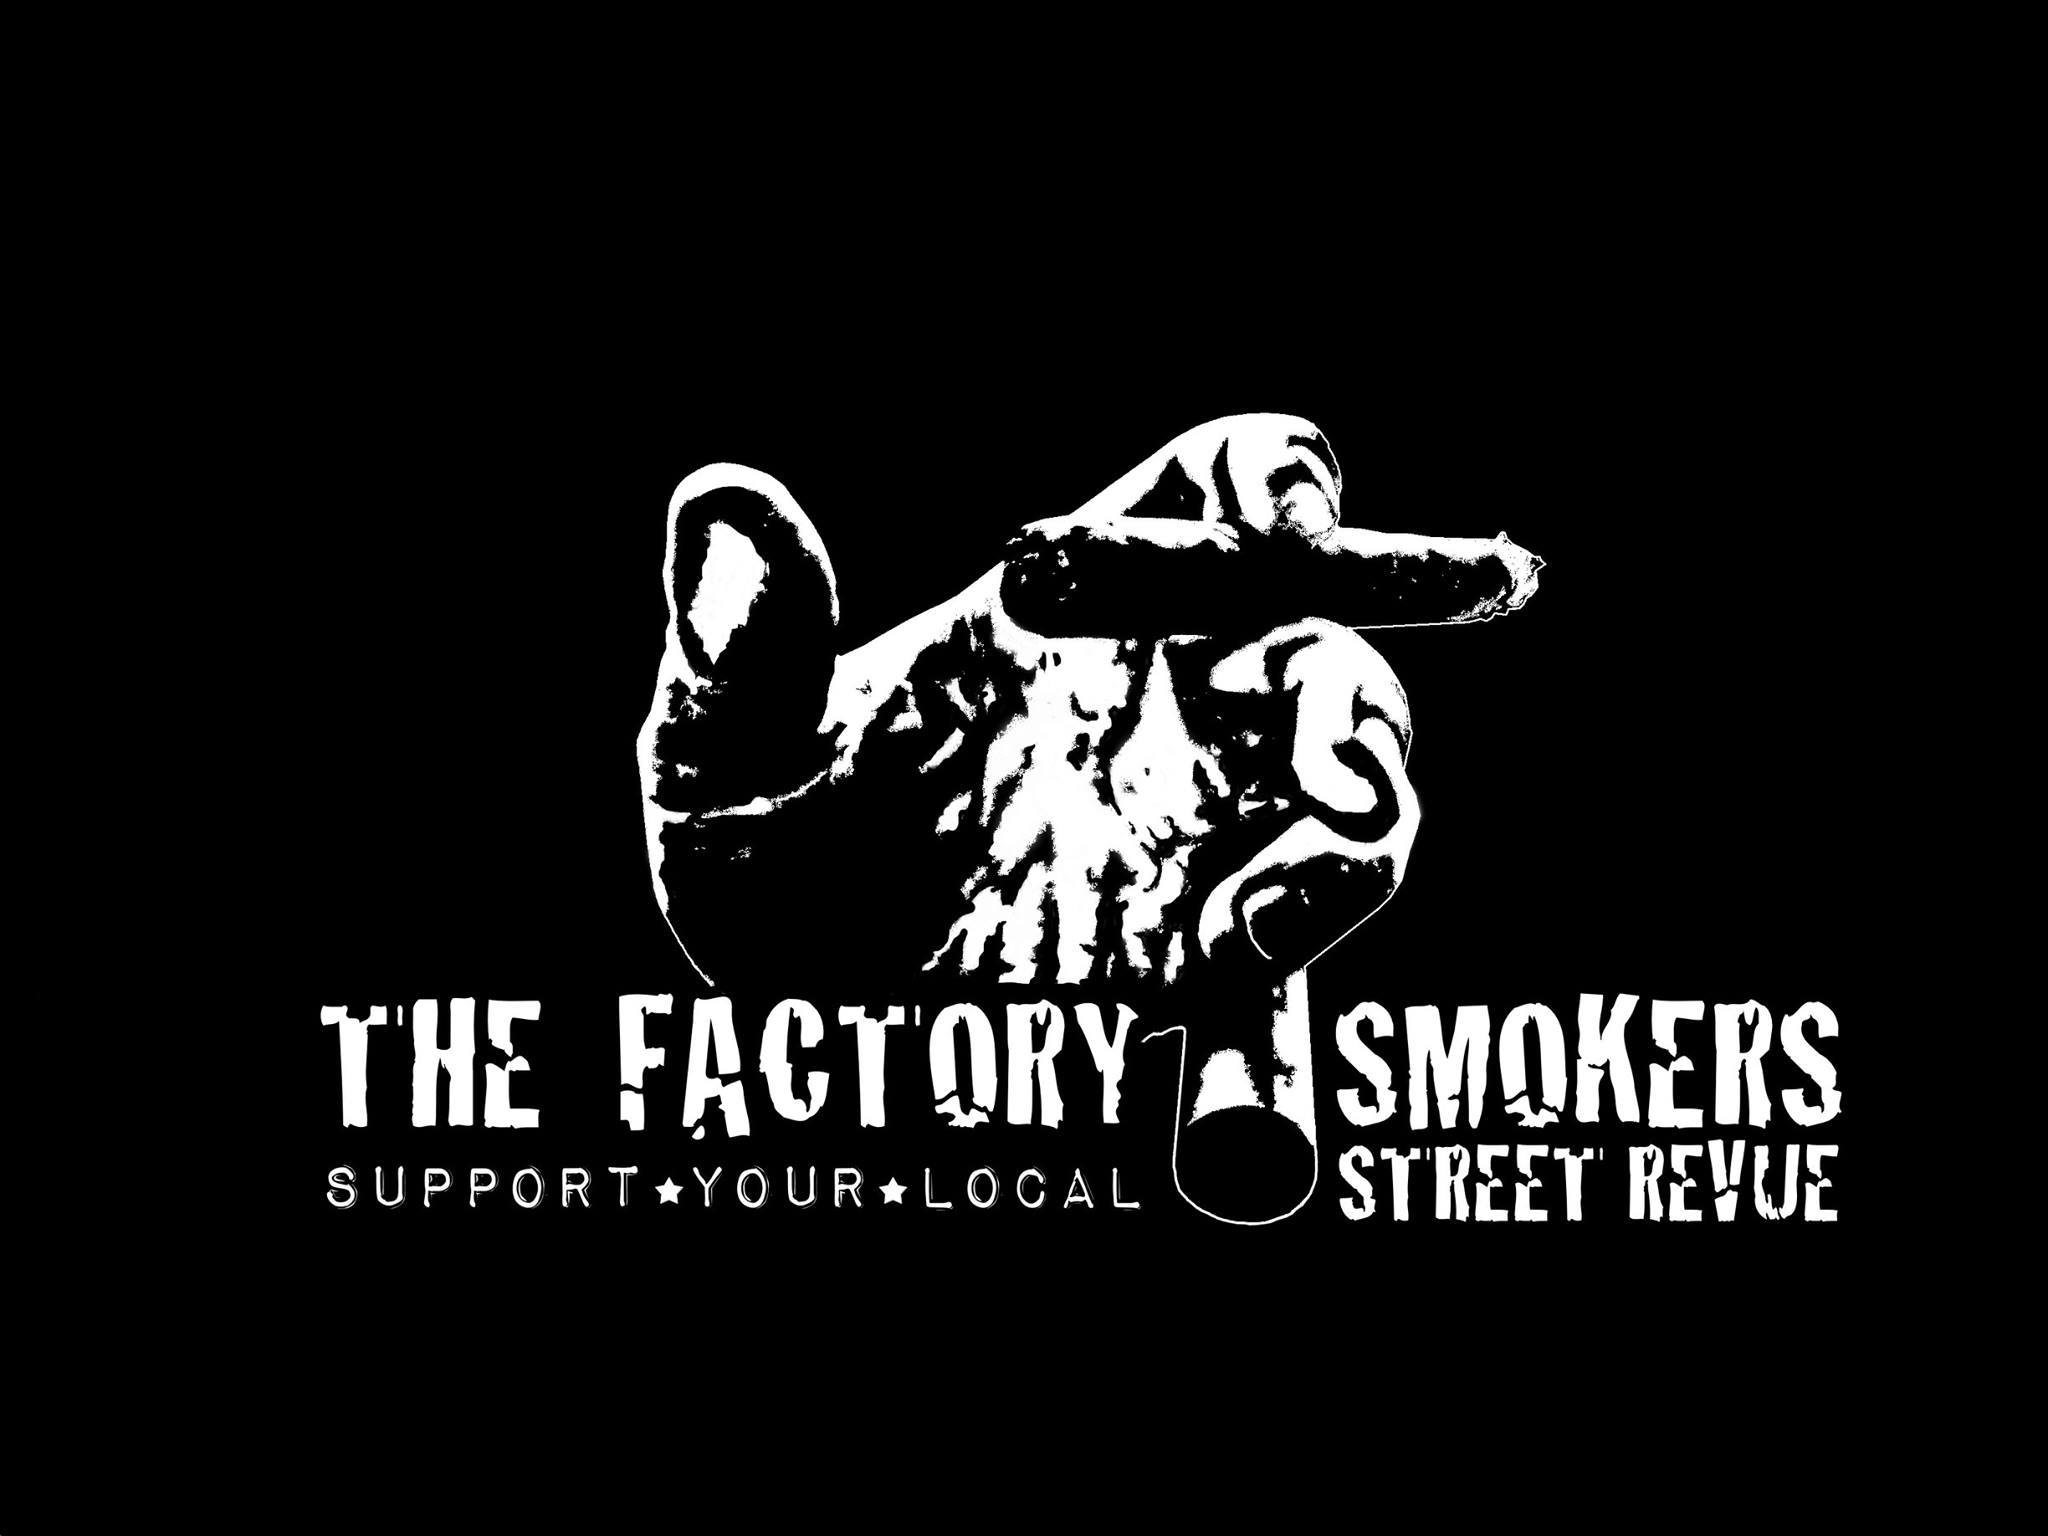 The Factory Smokers